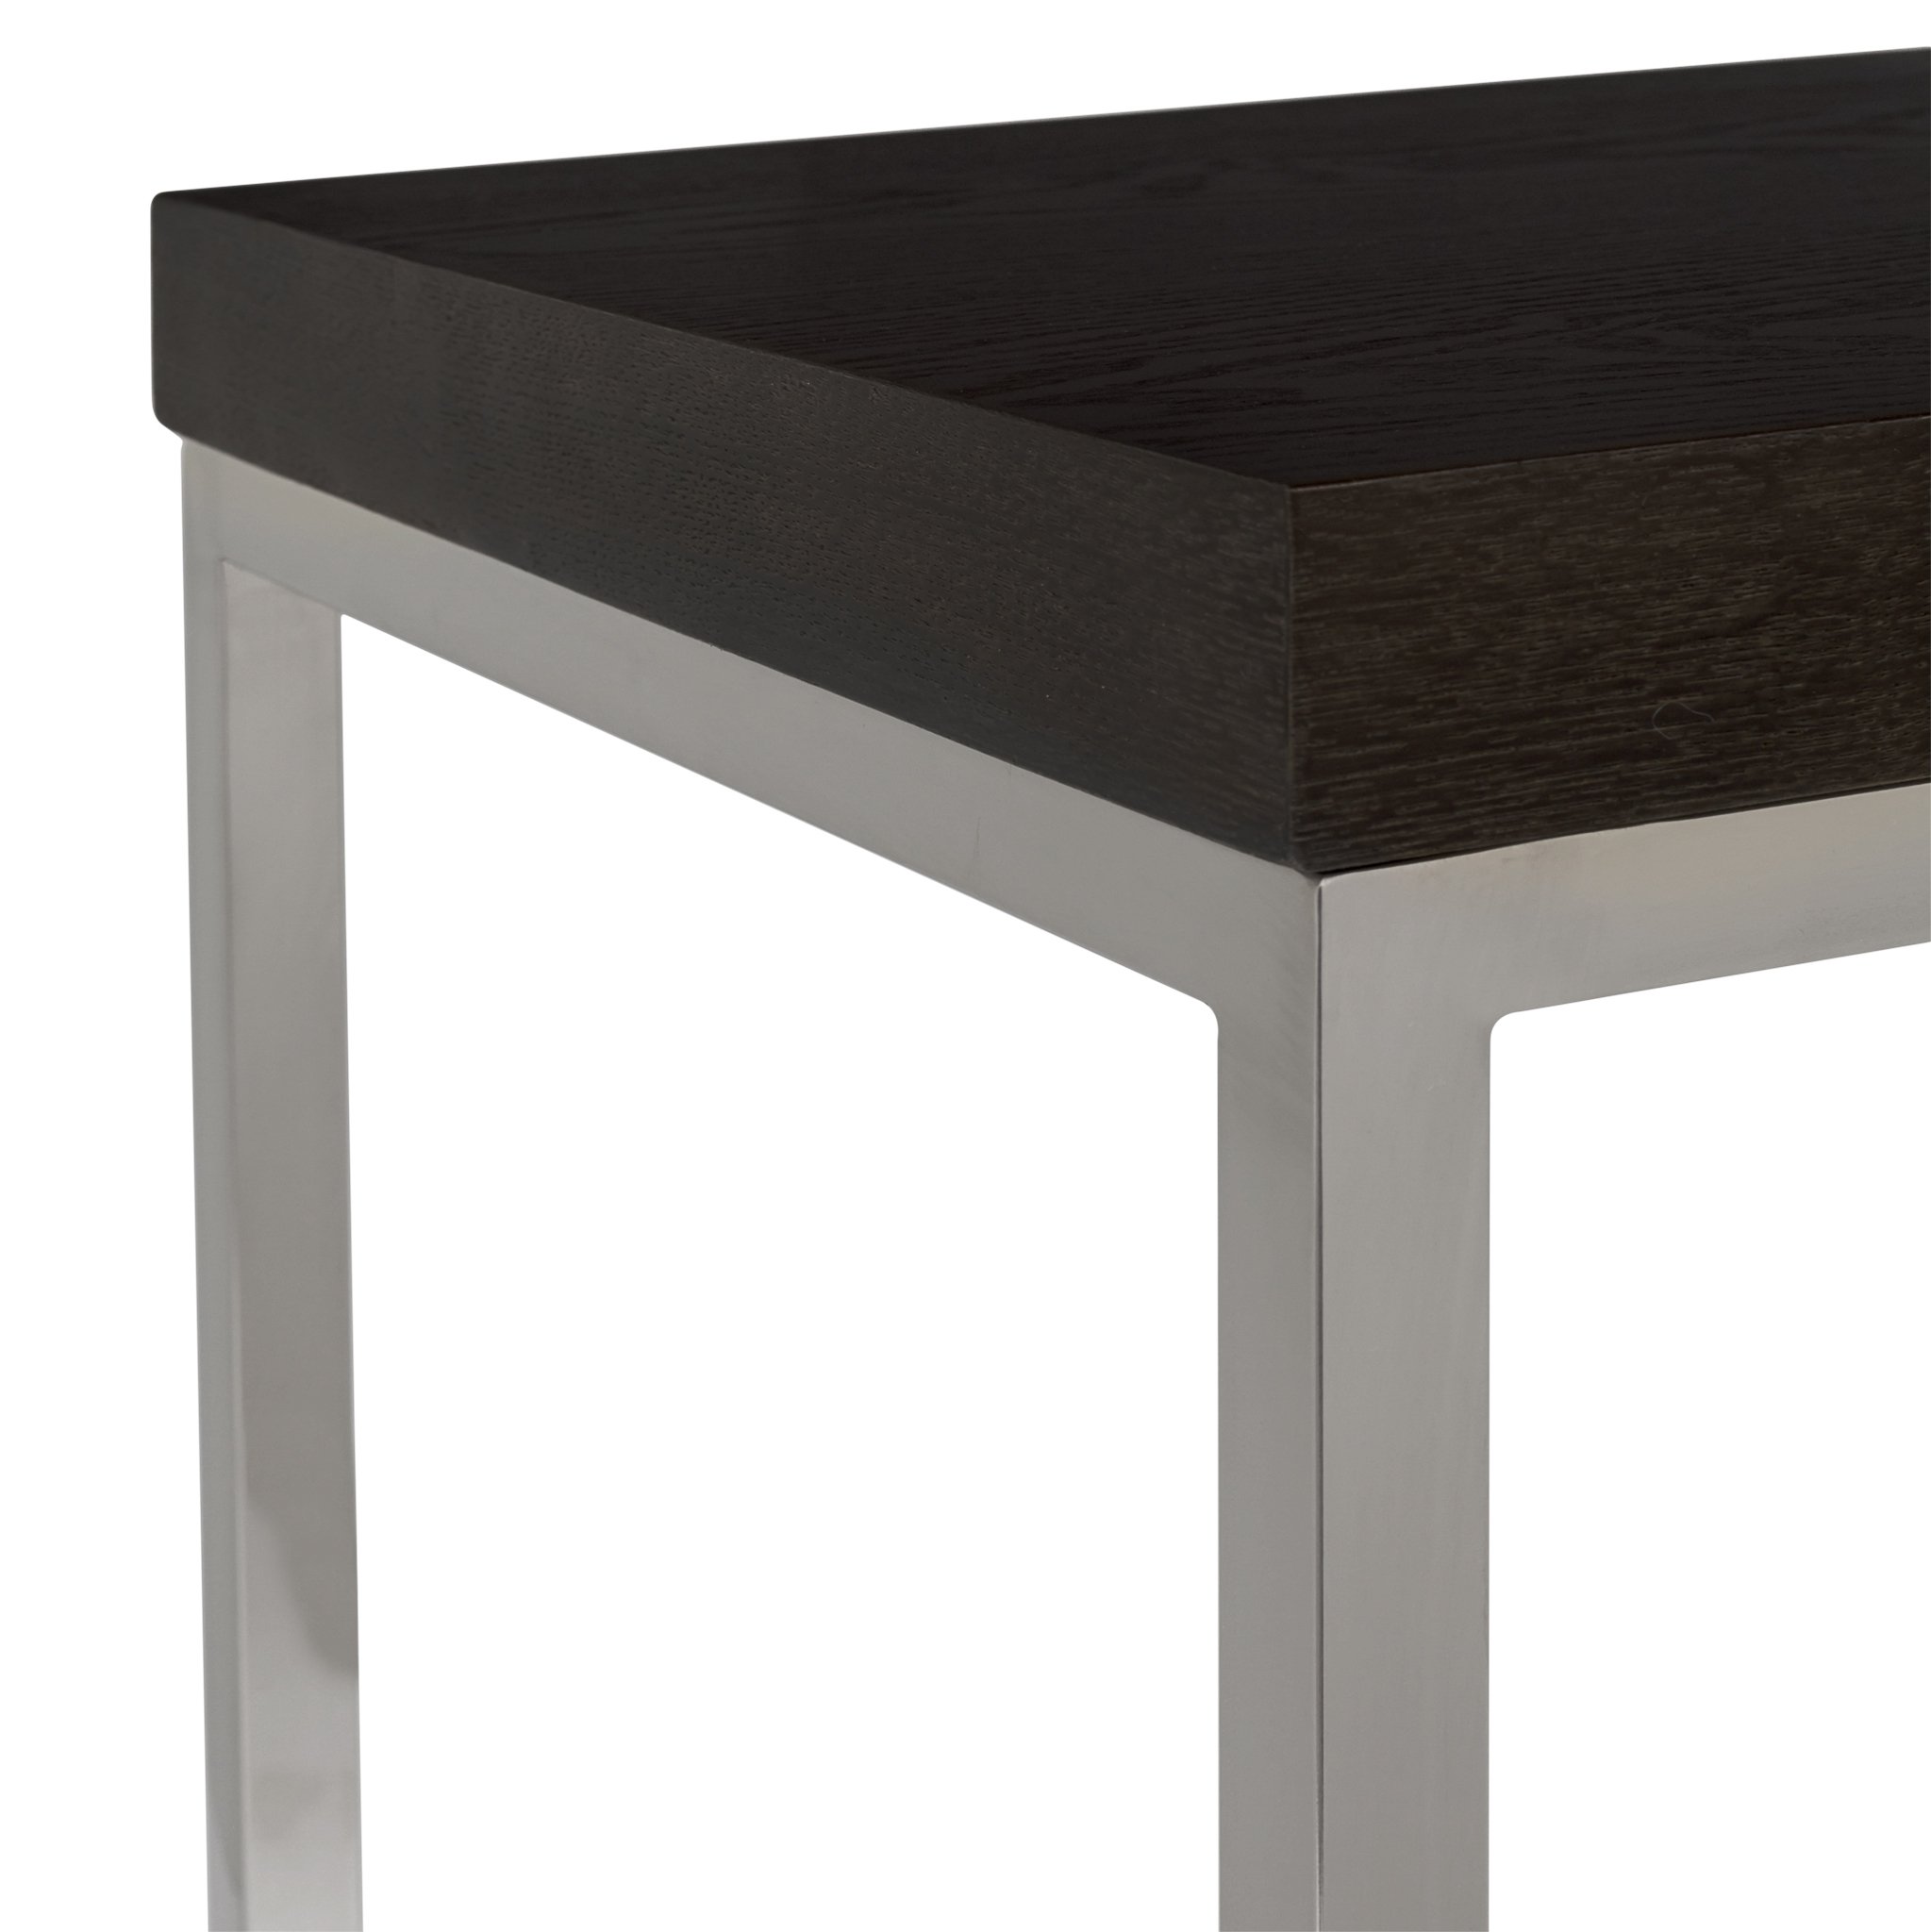 Turner Glass Top Square End Table - Black - Arlo Home - Image 1